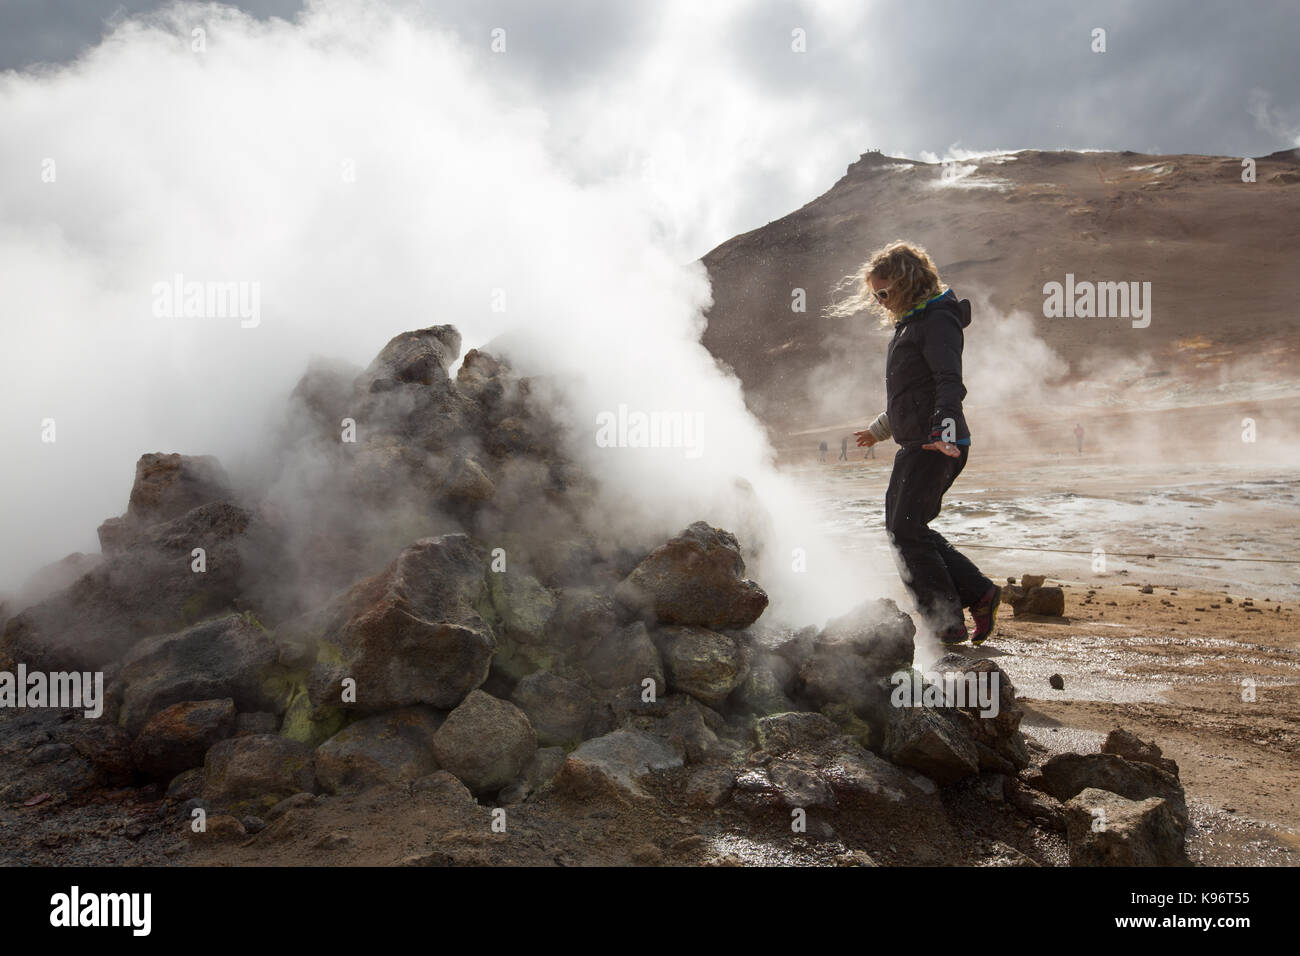 A woman walks among the steaming mud pots geothermal area near Lake Myvatn. Stock Photo